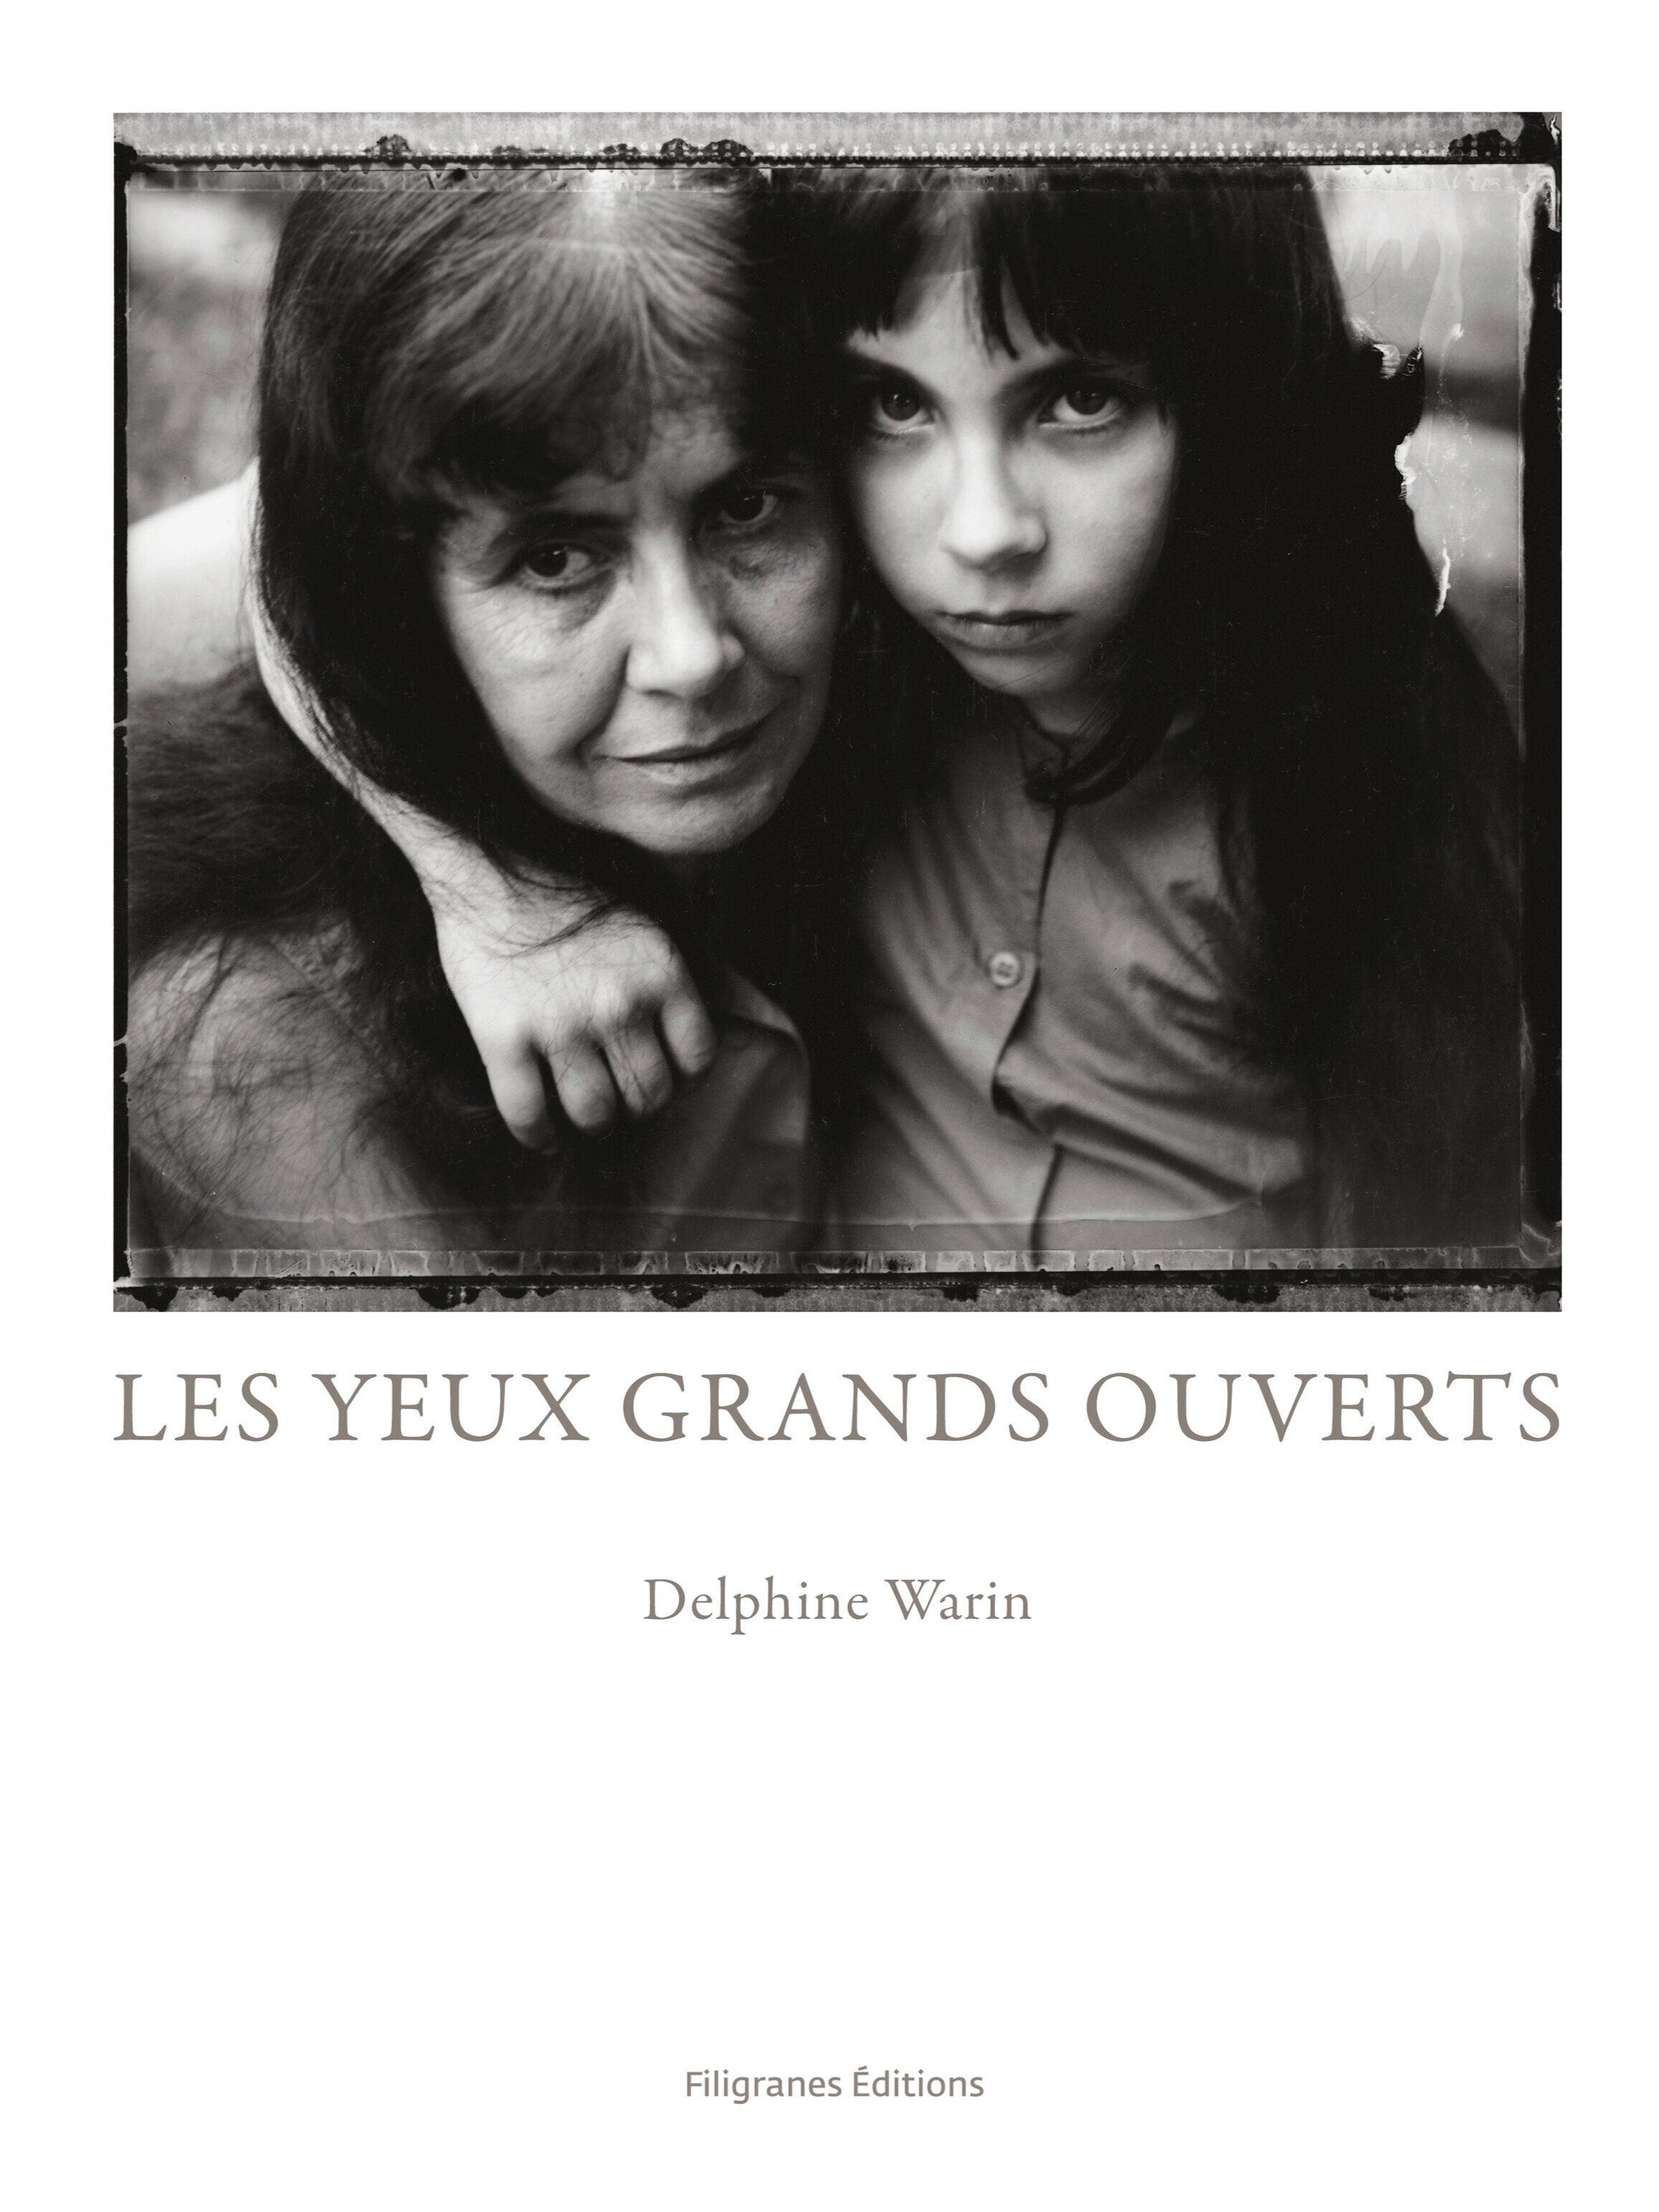 Cover+yeux+grands+ouverts.jpg